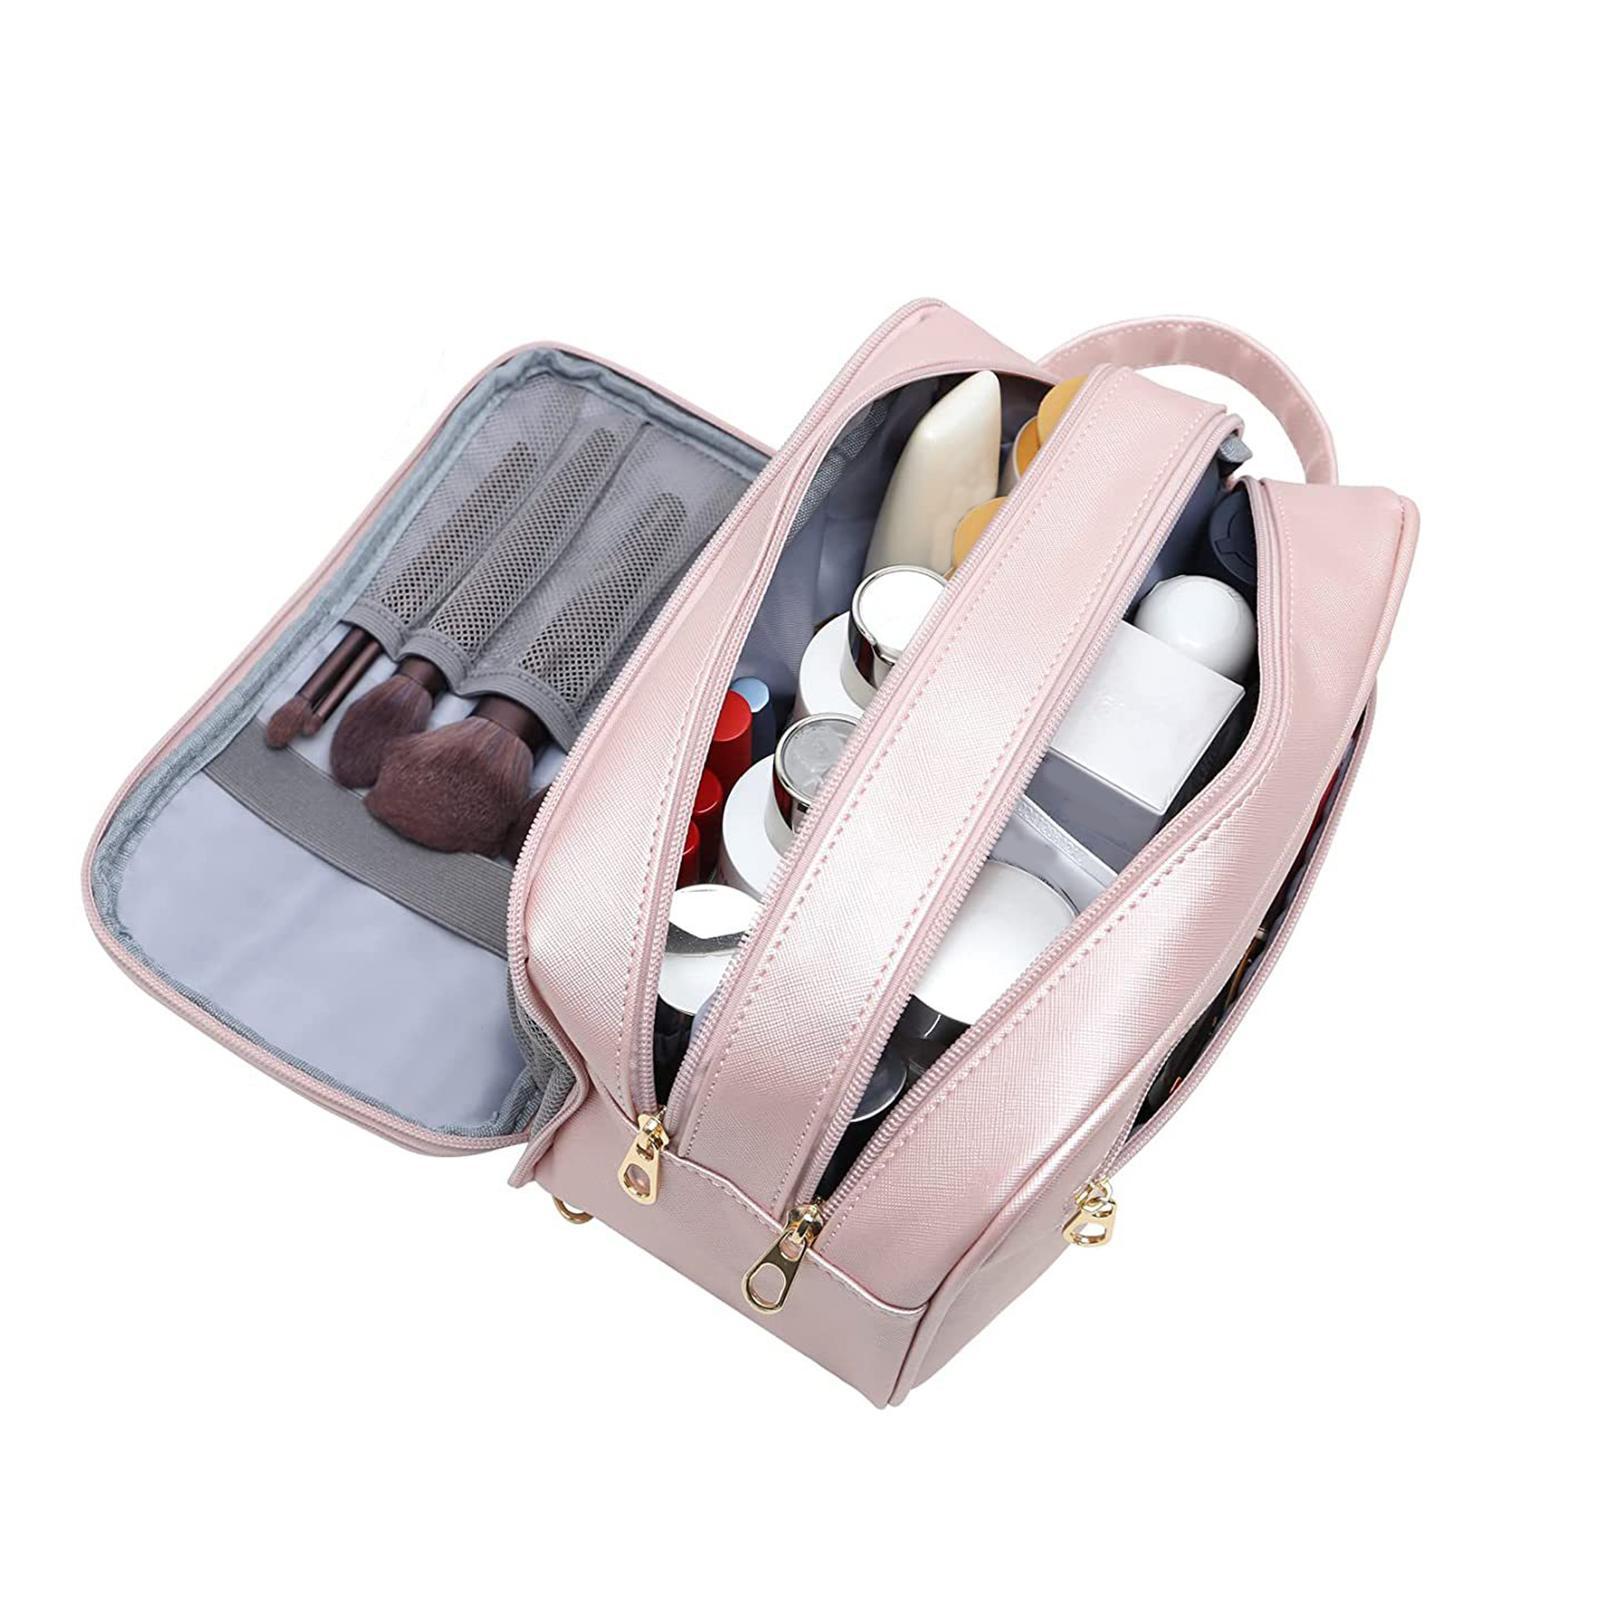 Cosmetic Container Toiletry Bag Wash Bag Makeup Tools Zipper Pouch PU Gym